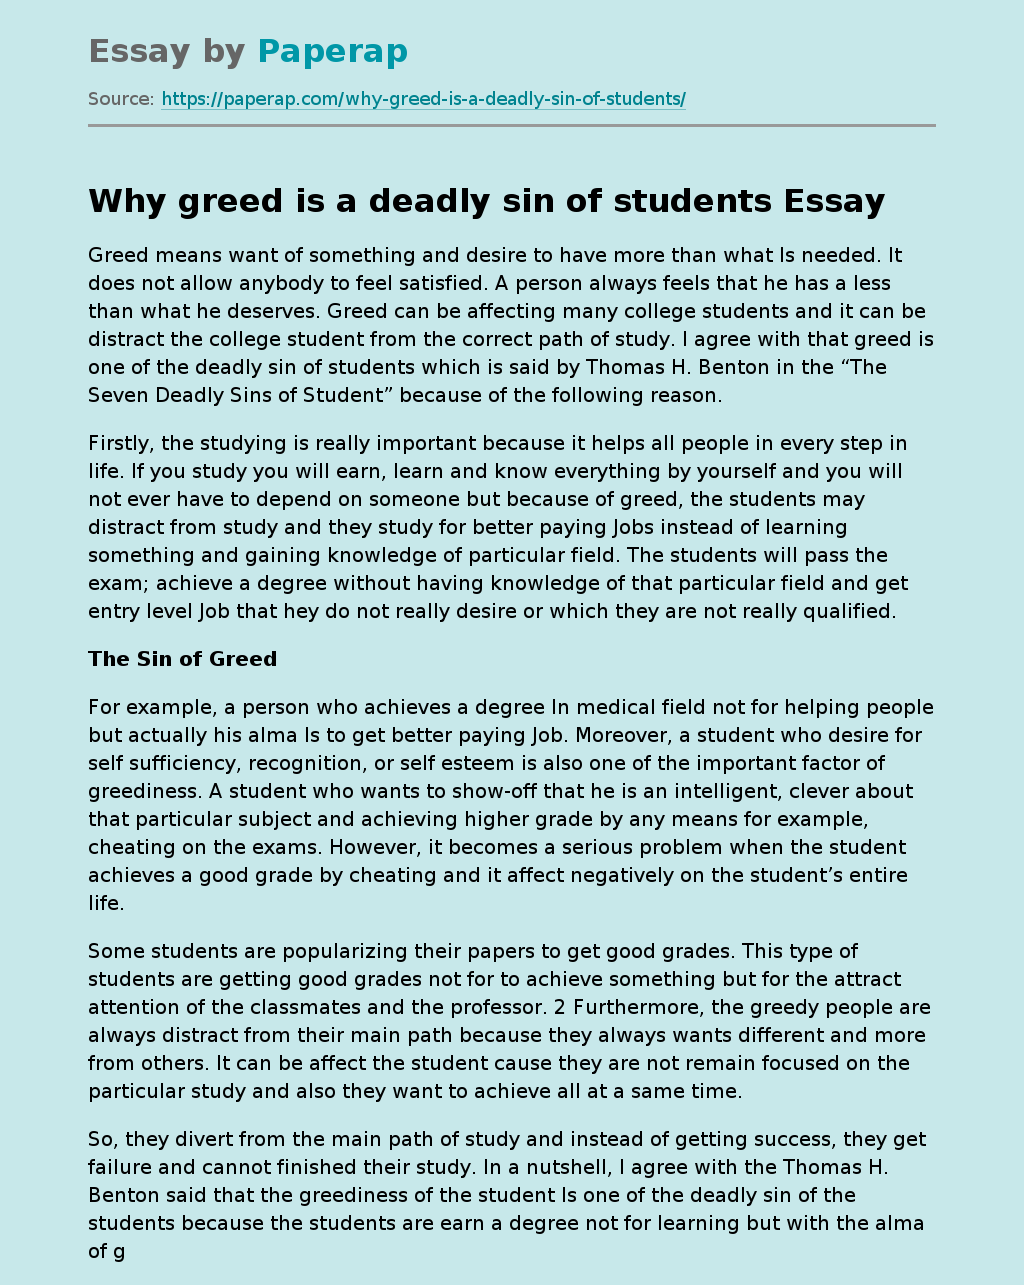 Why greed is a deadly sin of students